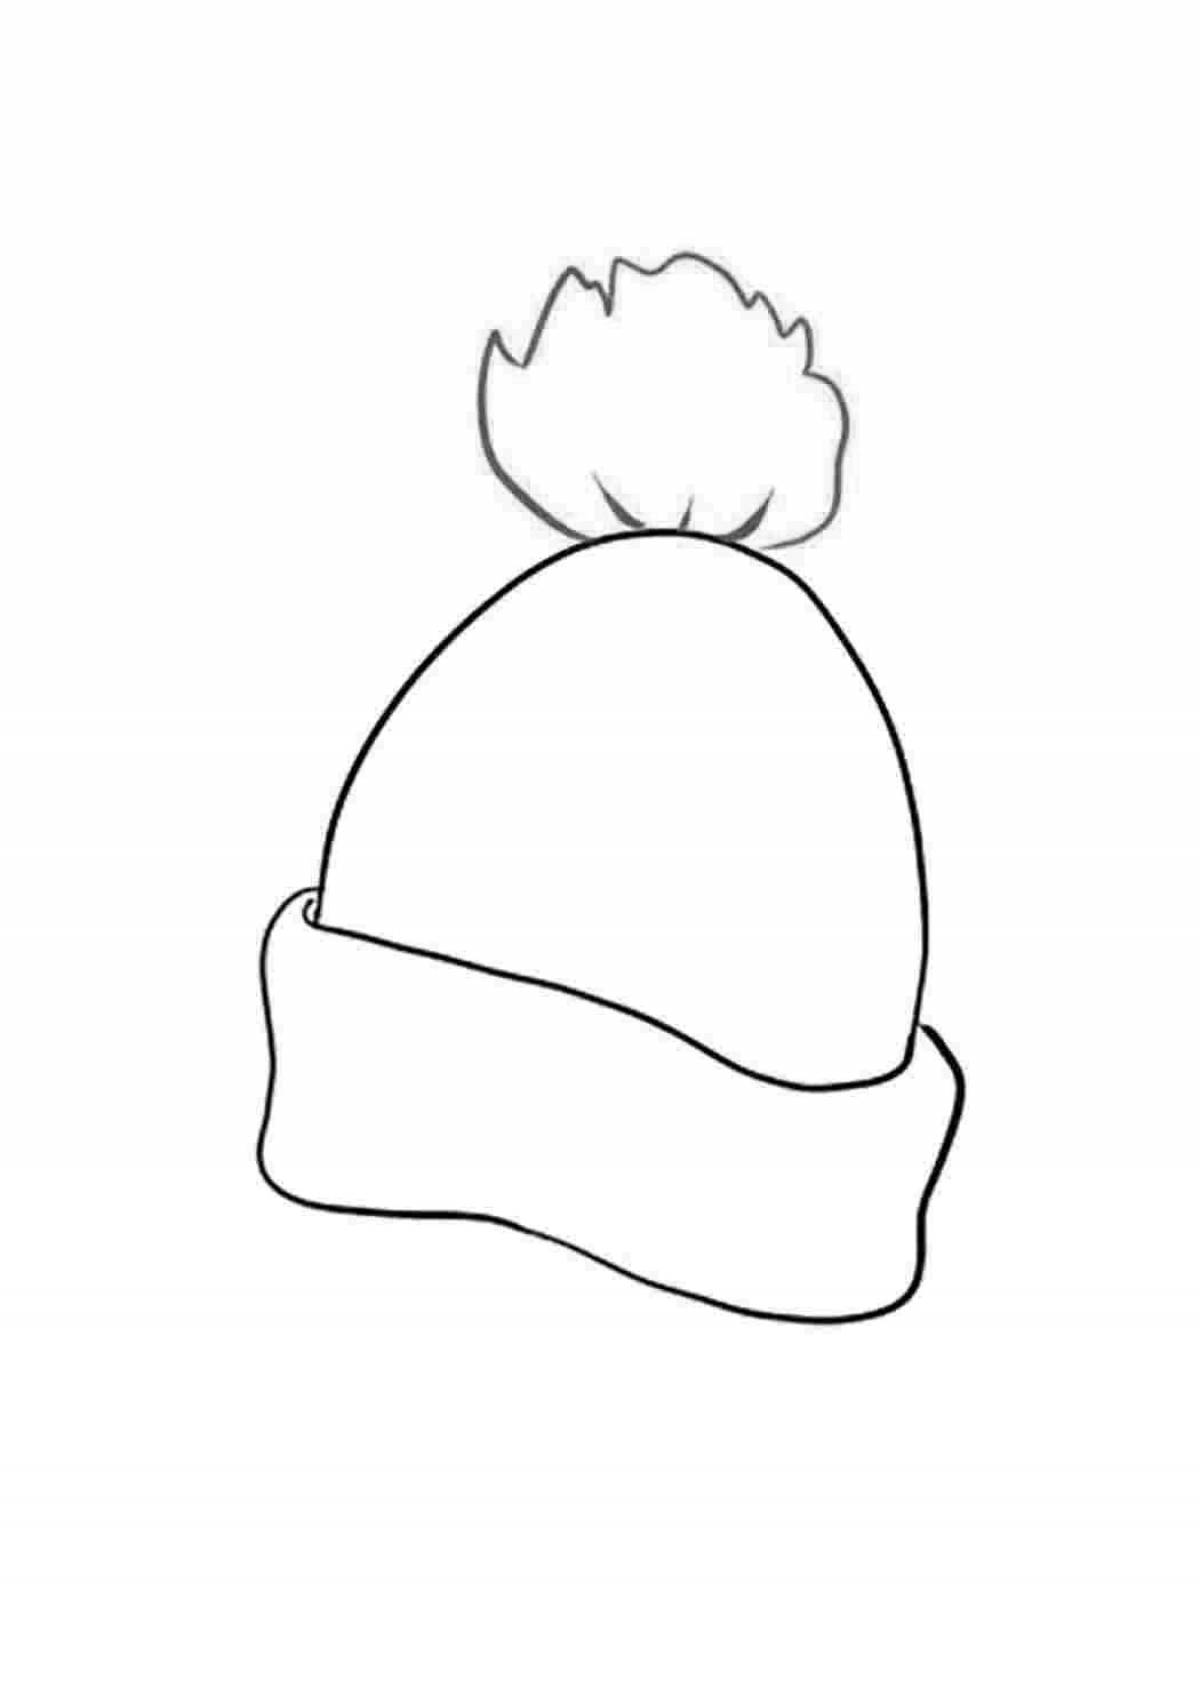 Adorable winter hat coloring book